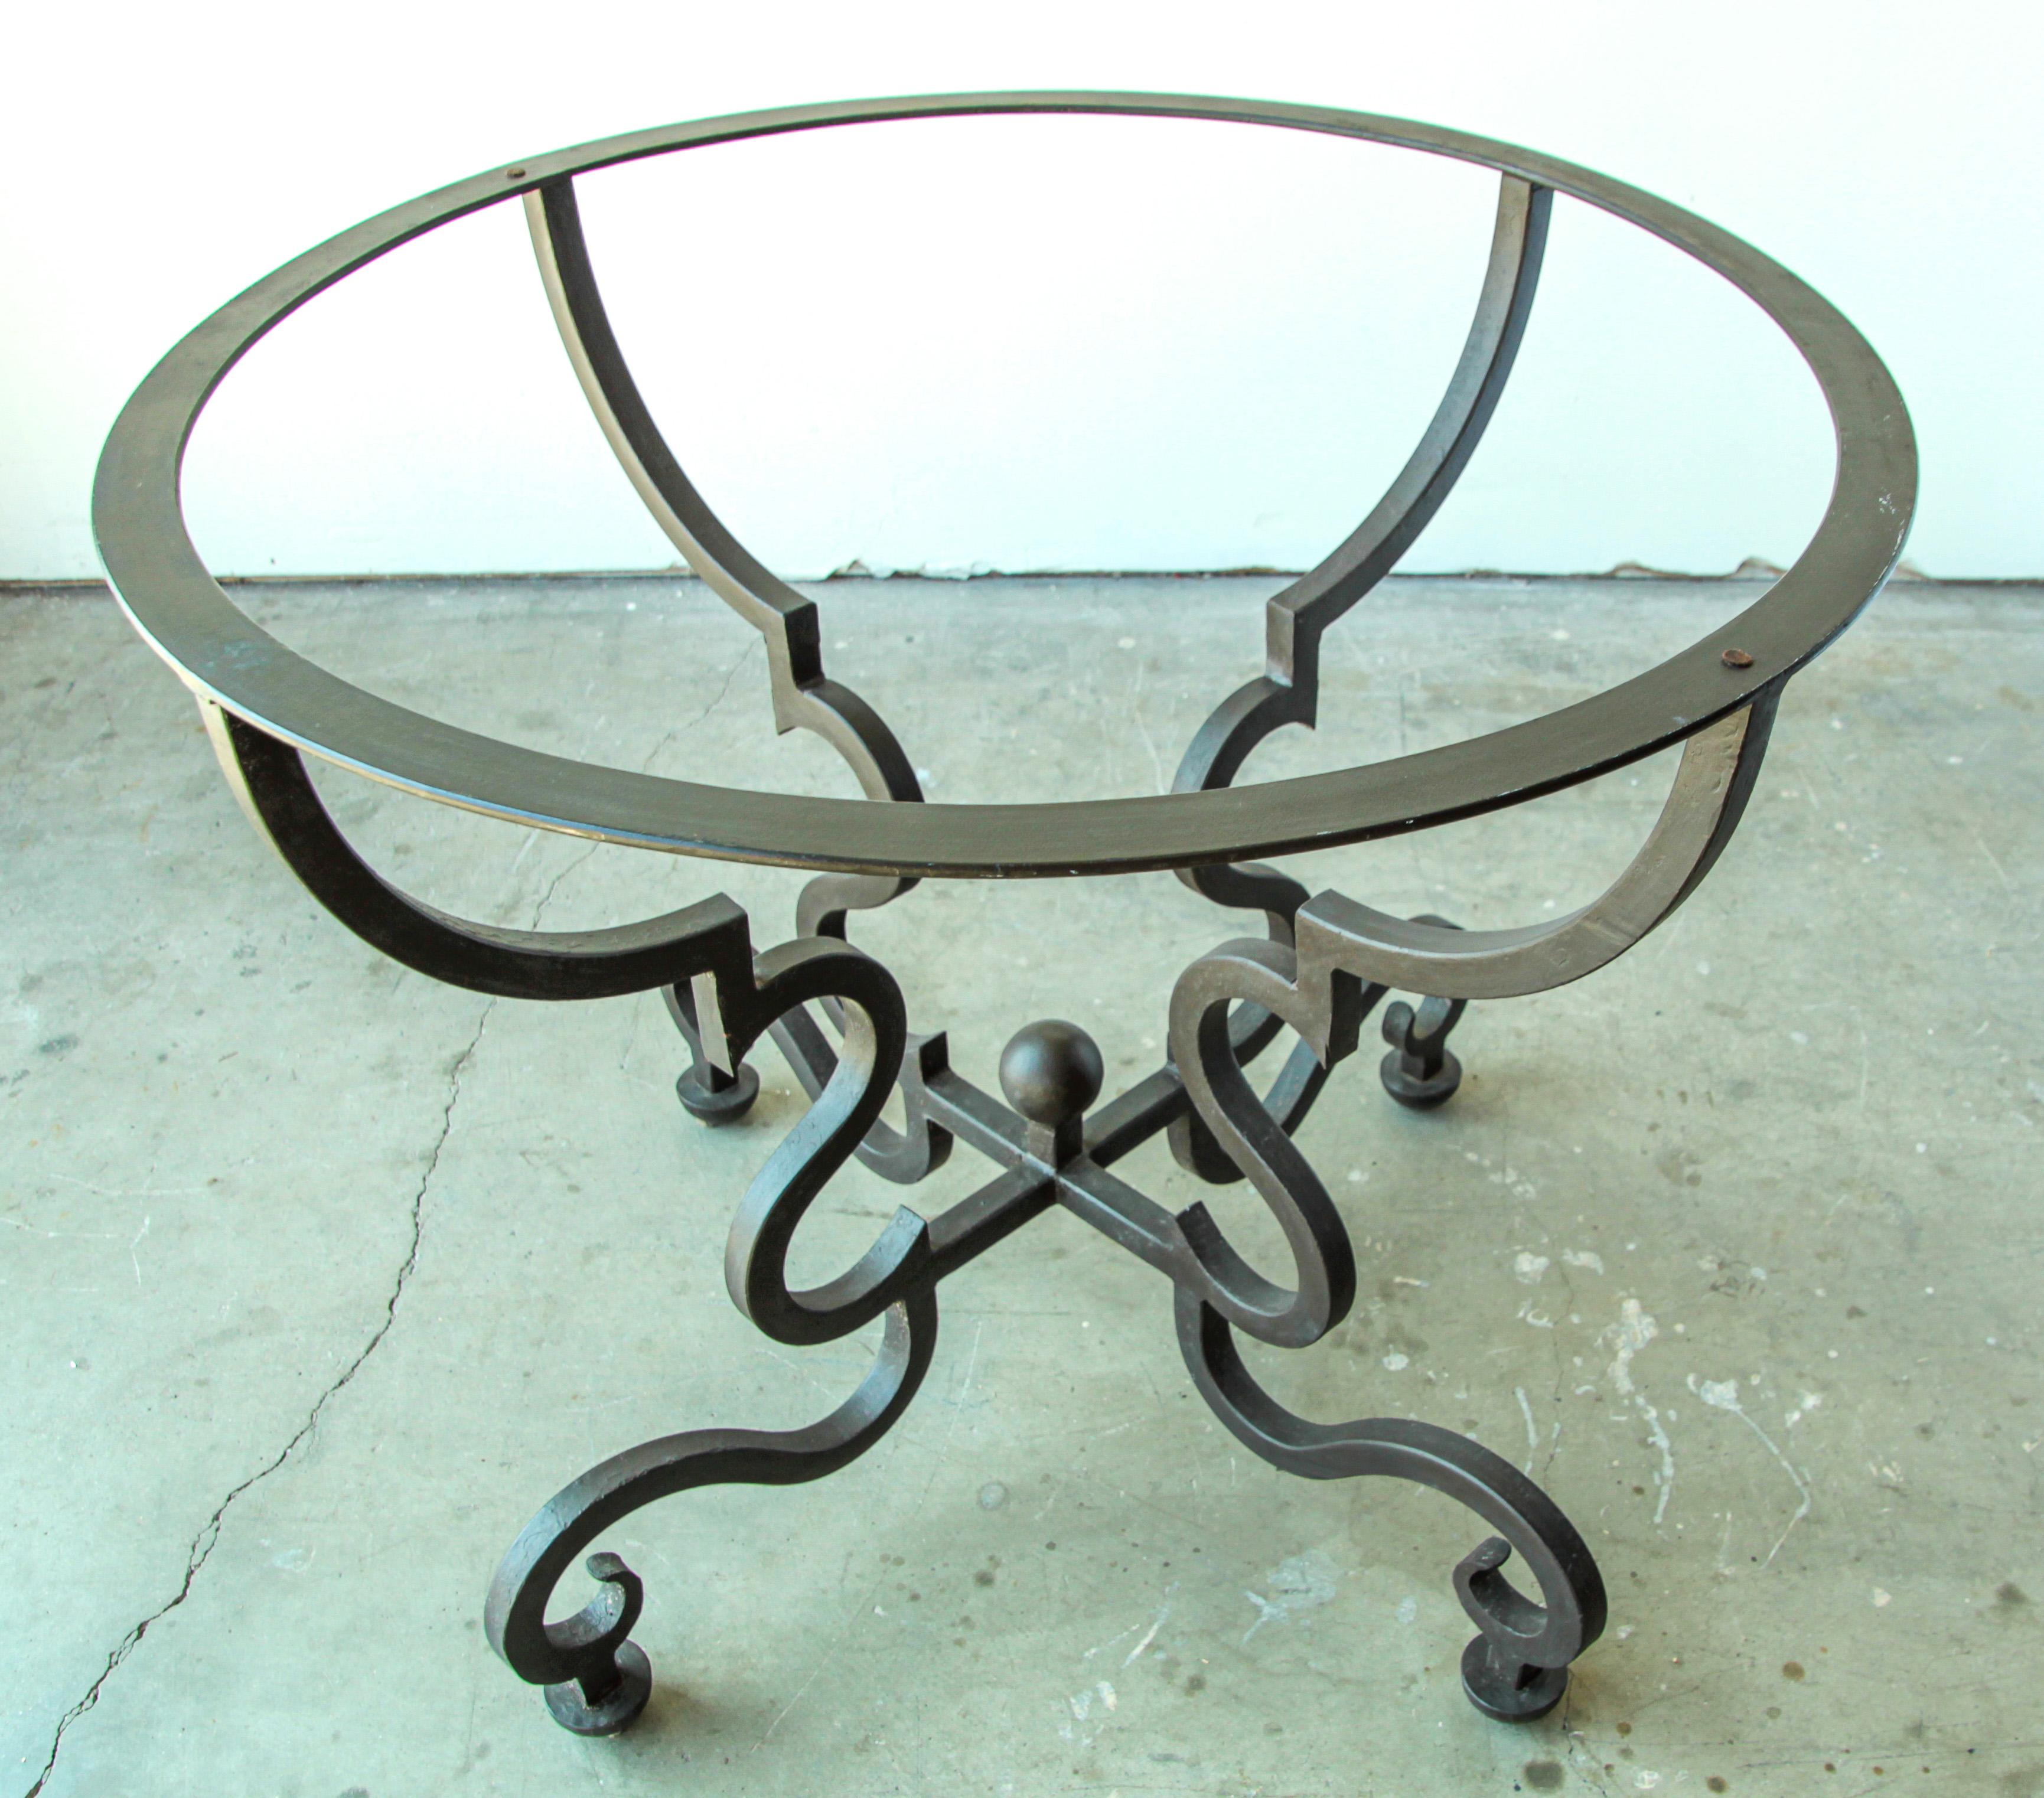 Hand-Crafted Spanish Colonial Wrought Iron Table Base